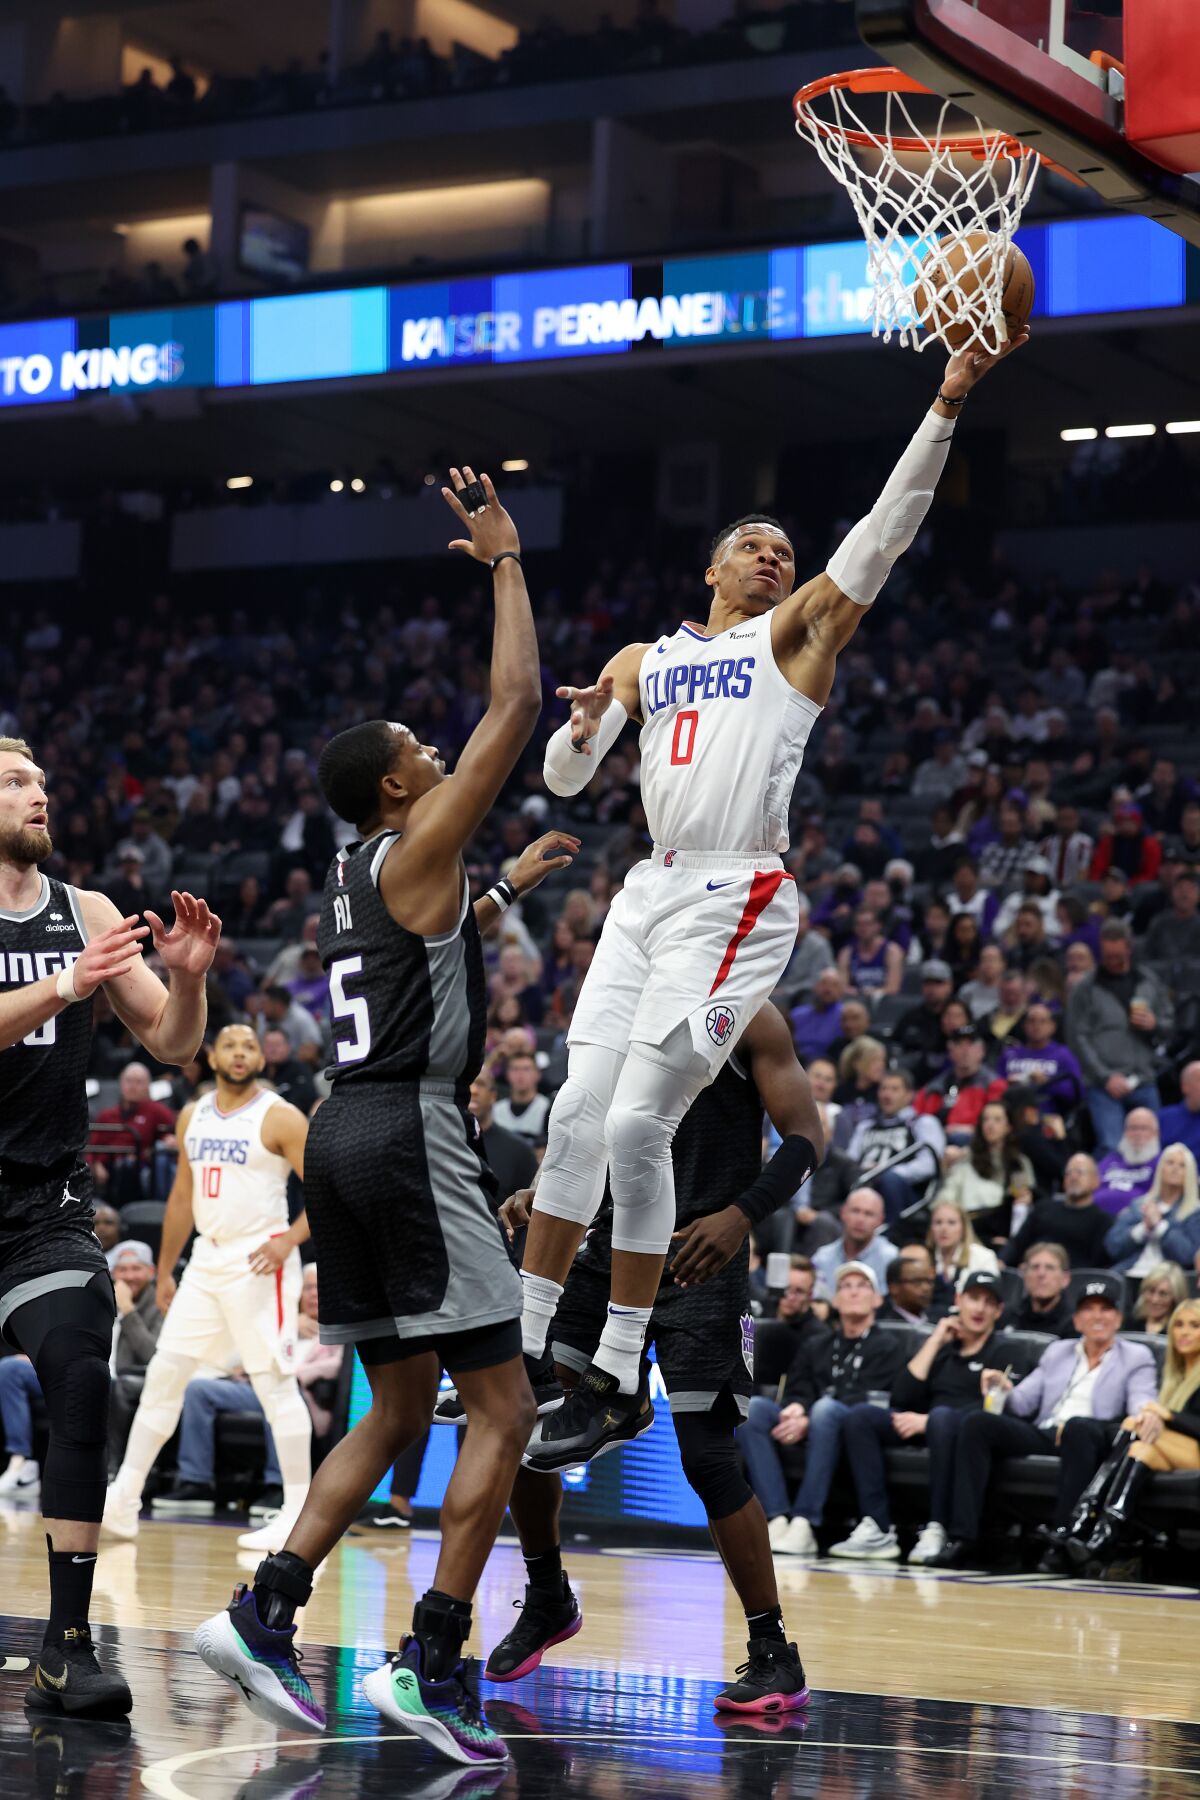 The Clippers' Russell Westbrook, who had 27 points and 10 assists, goes up for a shot over the Kings' De'Aaron Fox.